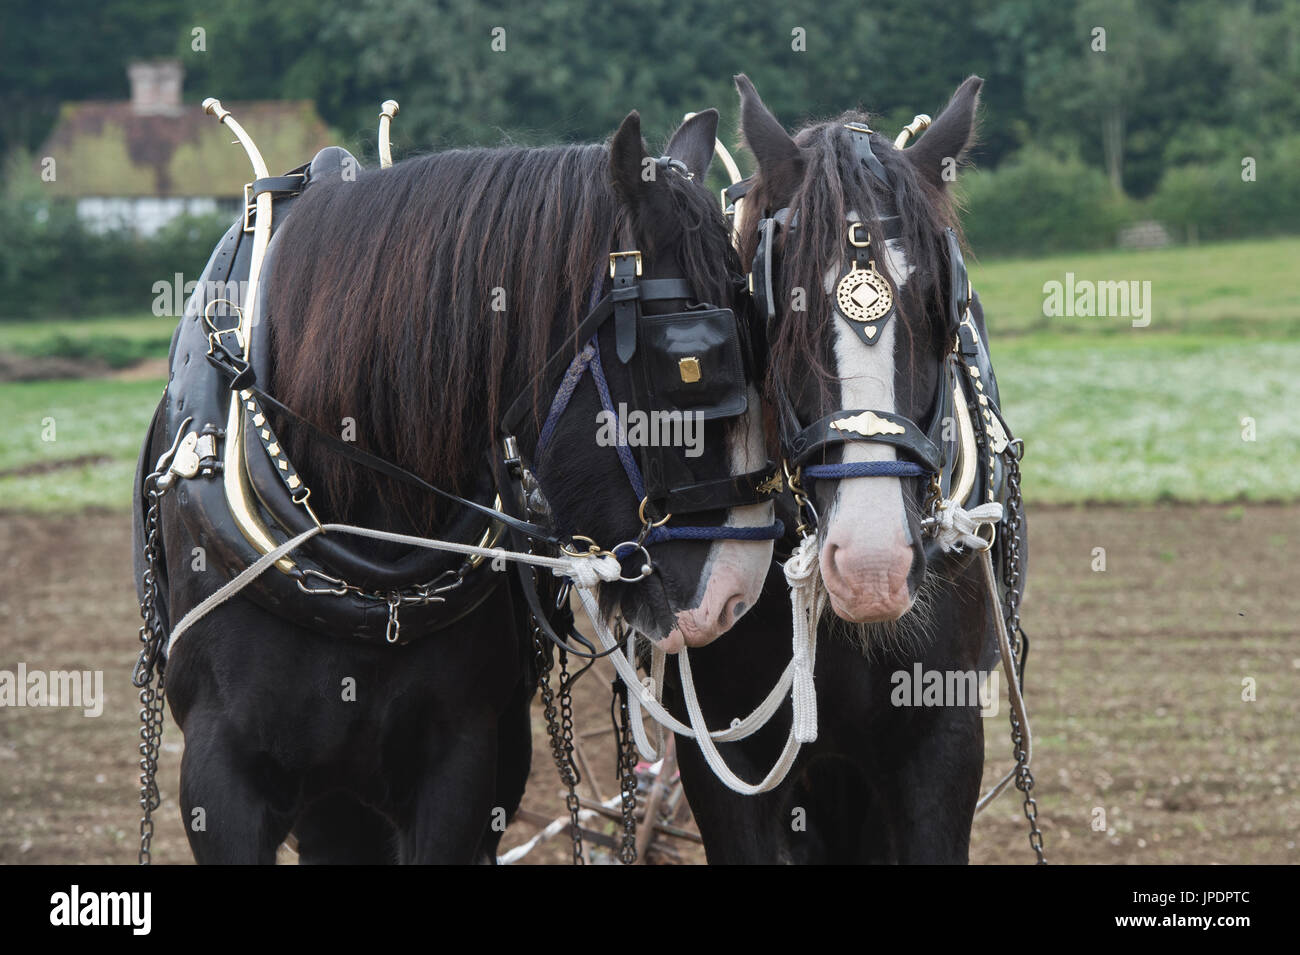 Shire horses ploughing at Weald and Downland open air museum, autumn countryside show, Singleton, Sussex, England Stock Photo